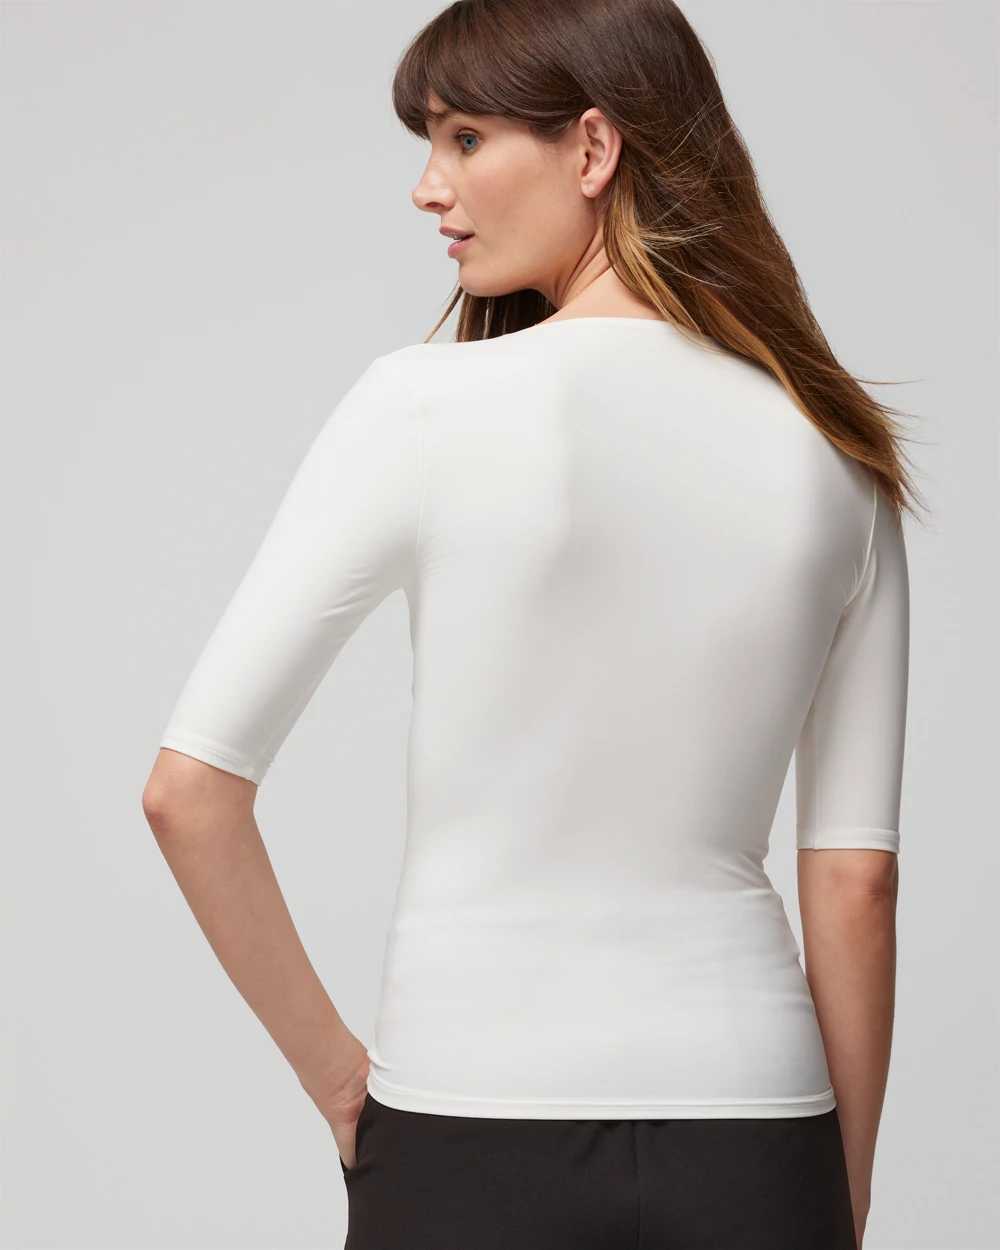 WHBM® FORME Elbow-Sleeve Top click to view larger image.